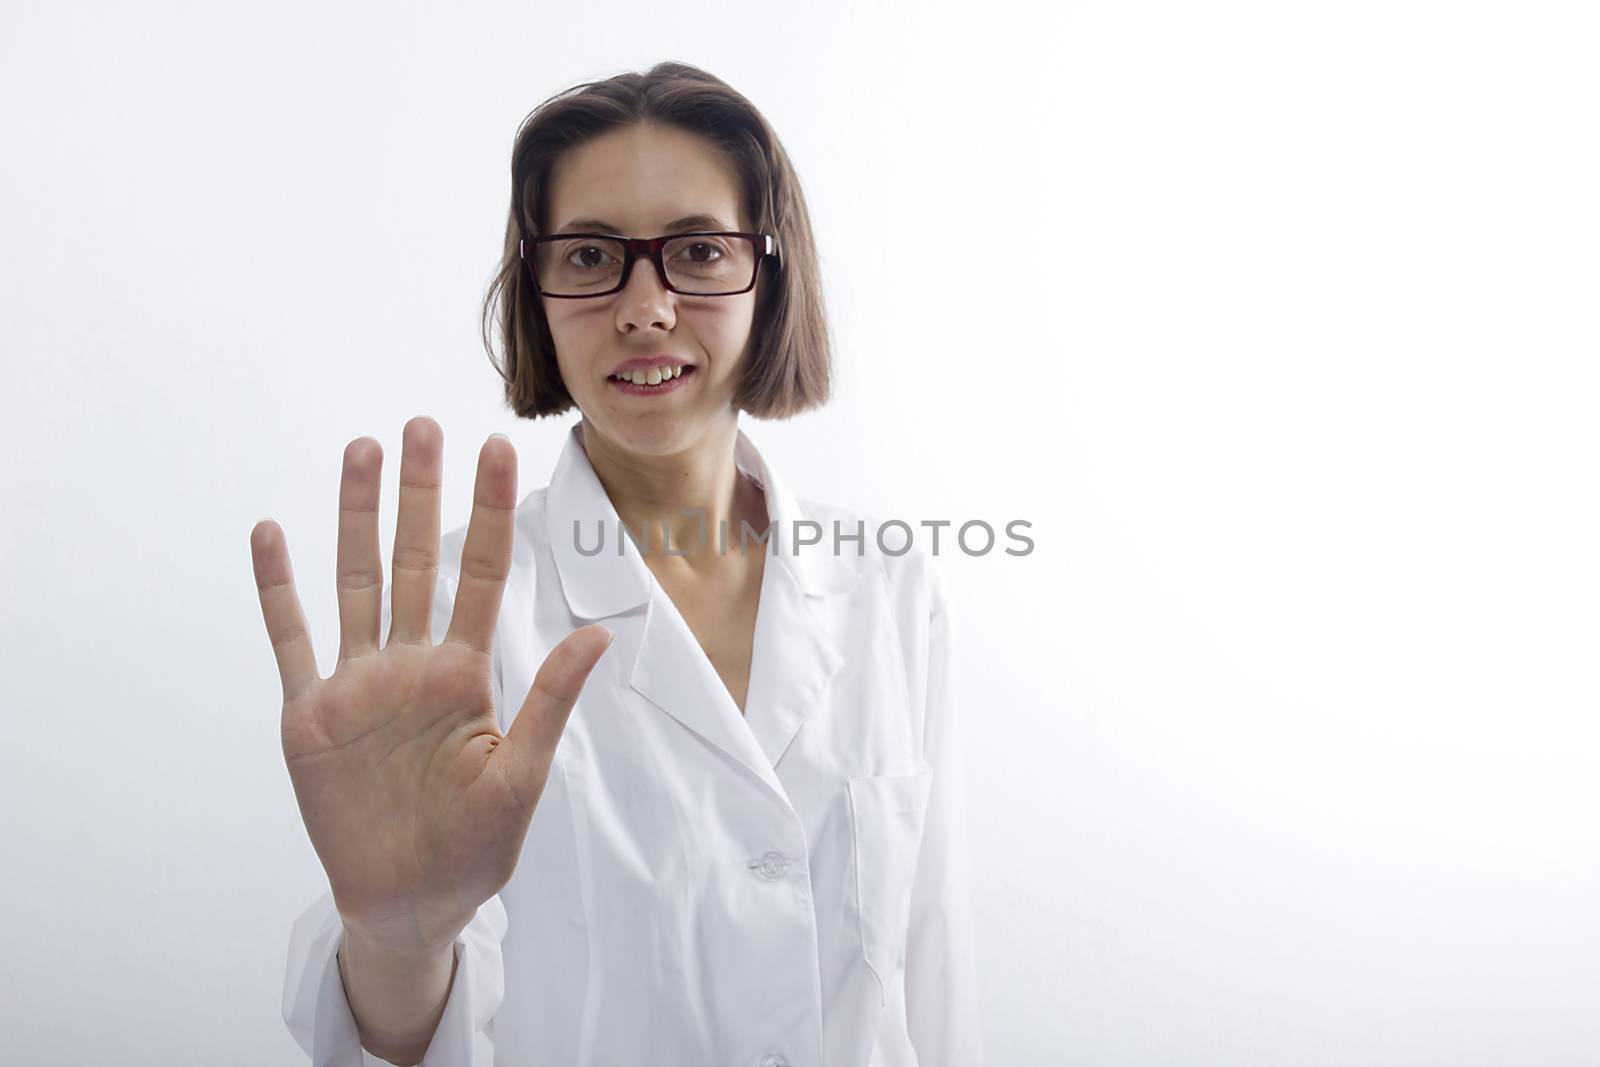 Female doctor raised her hand in greeting